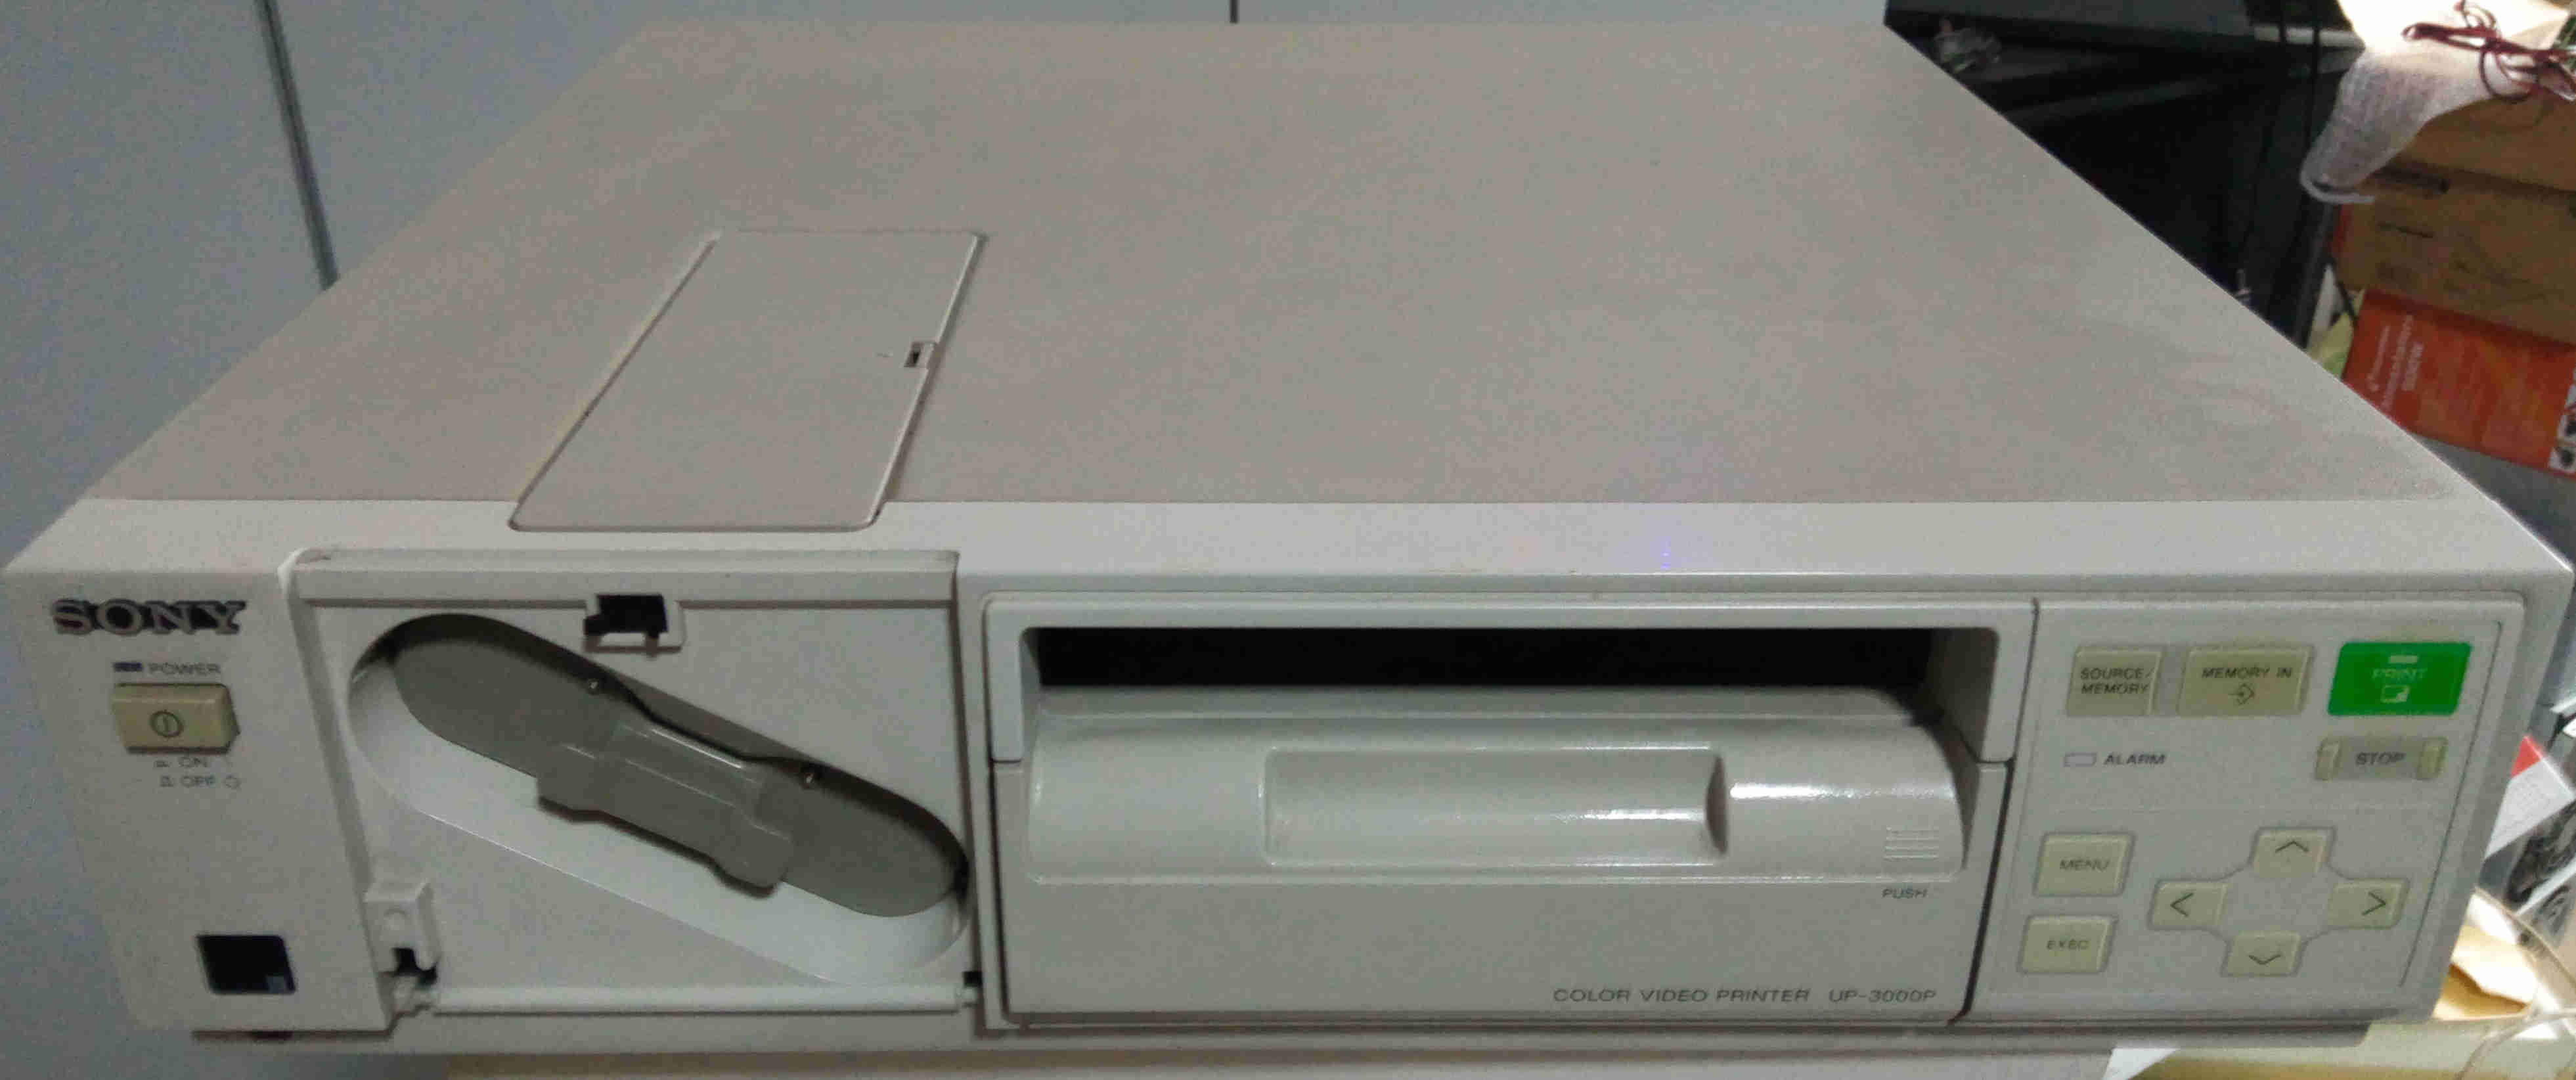 up3000 sony color printer